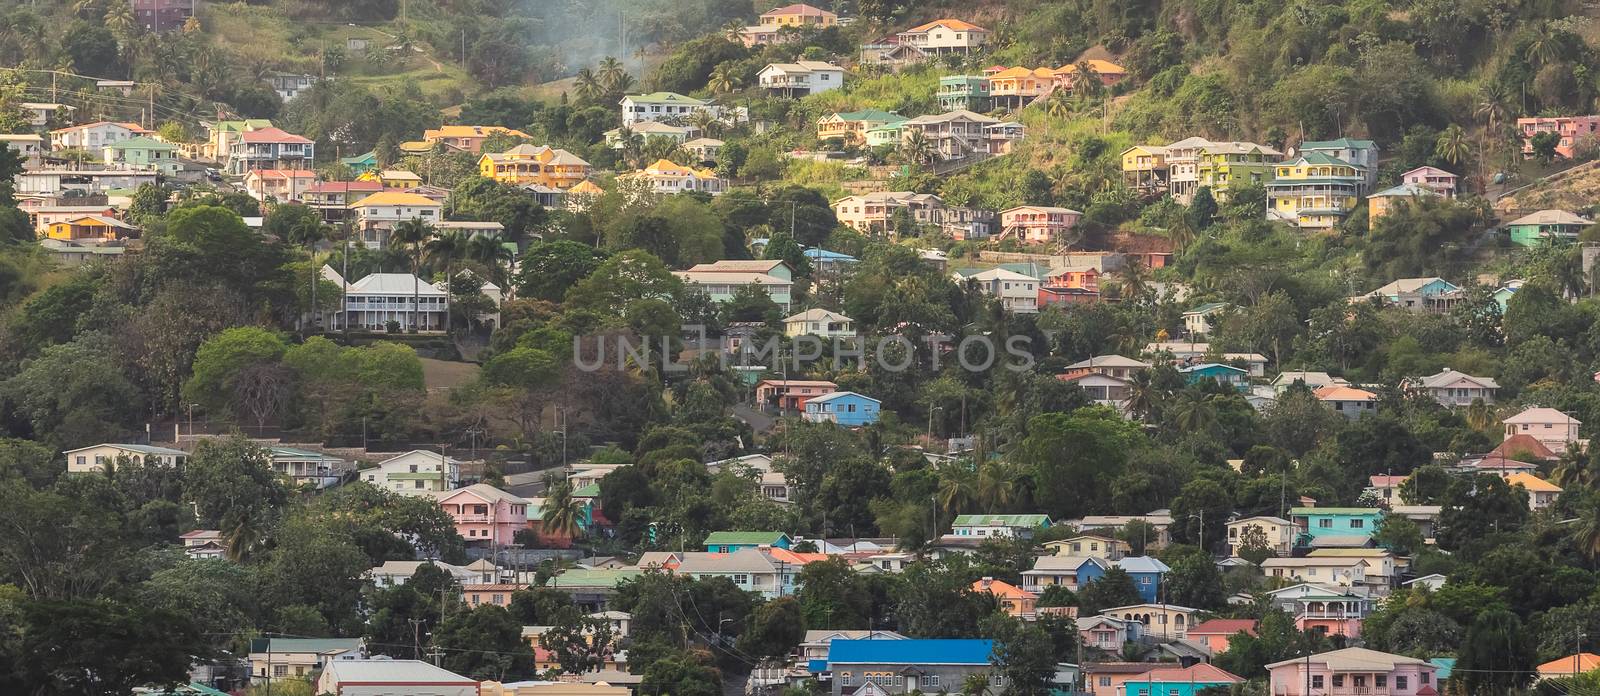 Aerial view of houses on St. Vincent island in the Caribbean